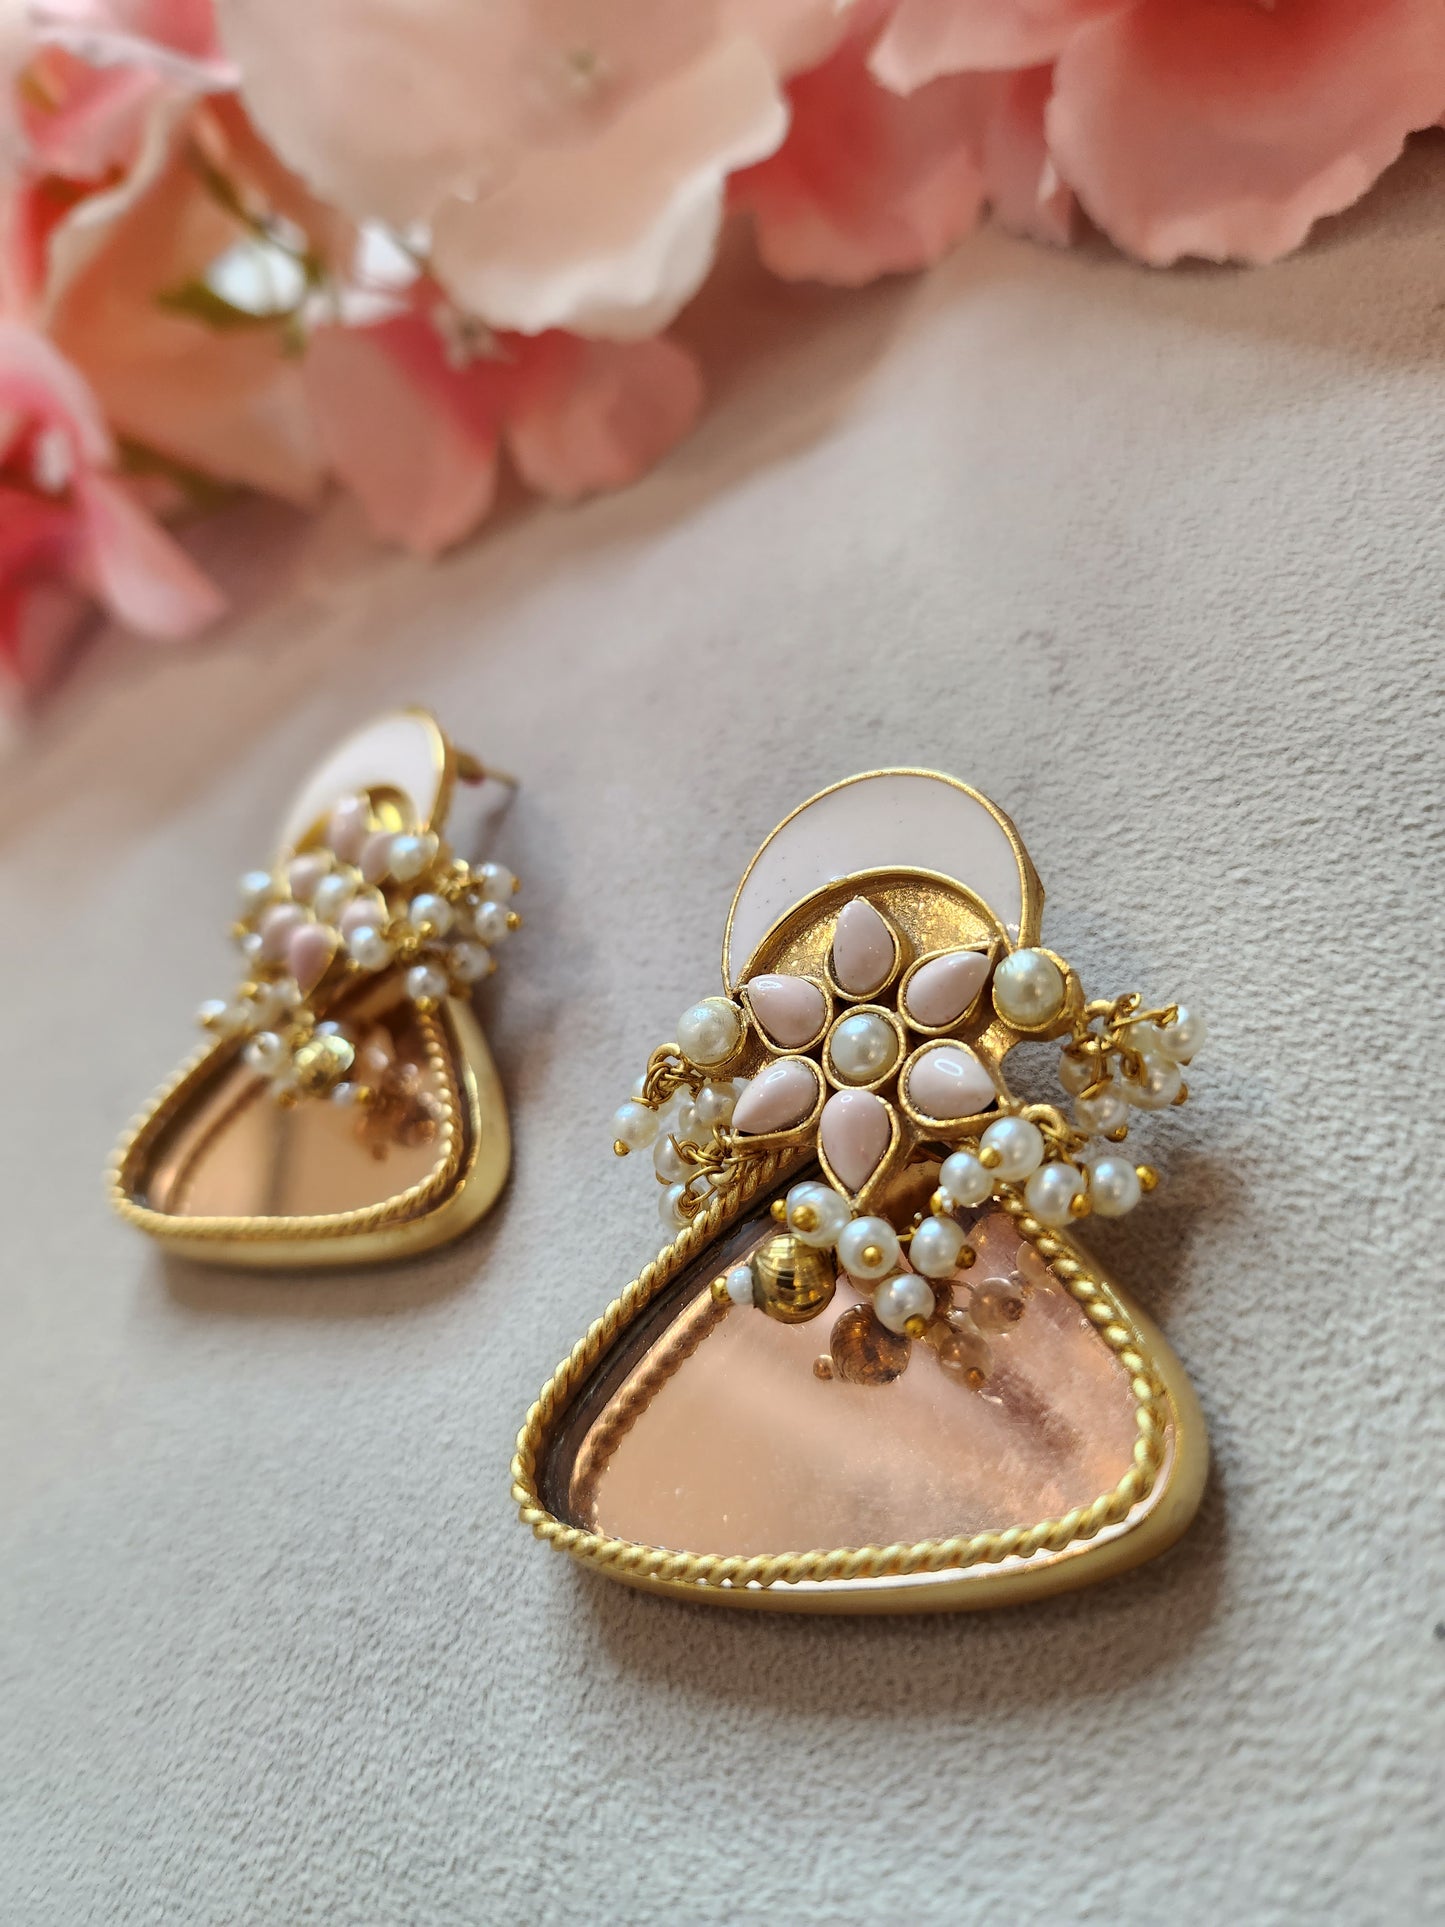 THE BUTTERFLY EFFECT JEWELRY - Rose gold mirror and enamel earrings